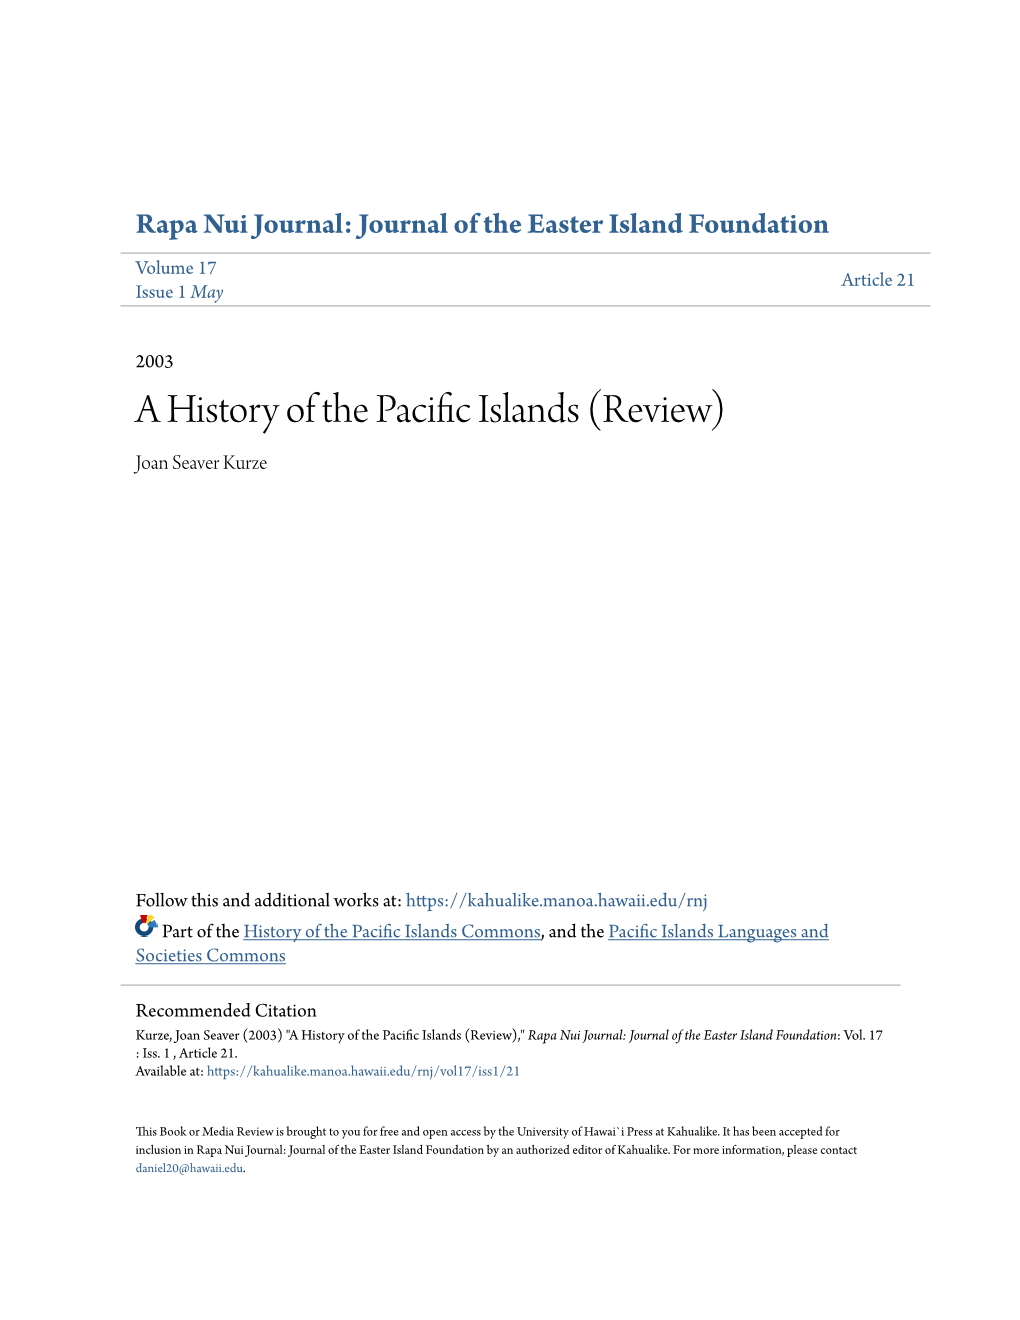 A History of the Pacific Islands (Review)